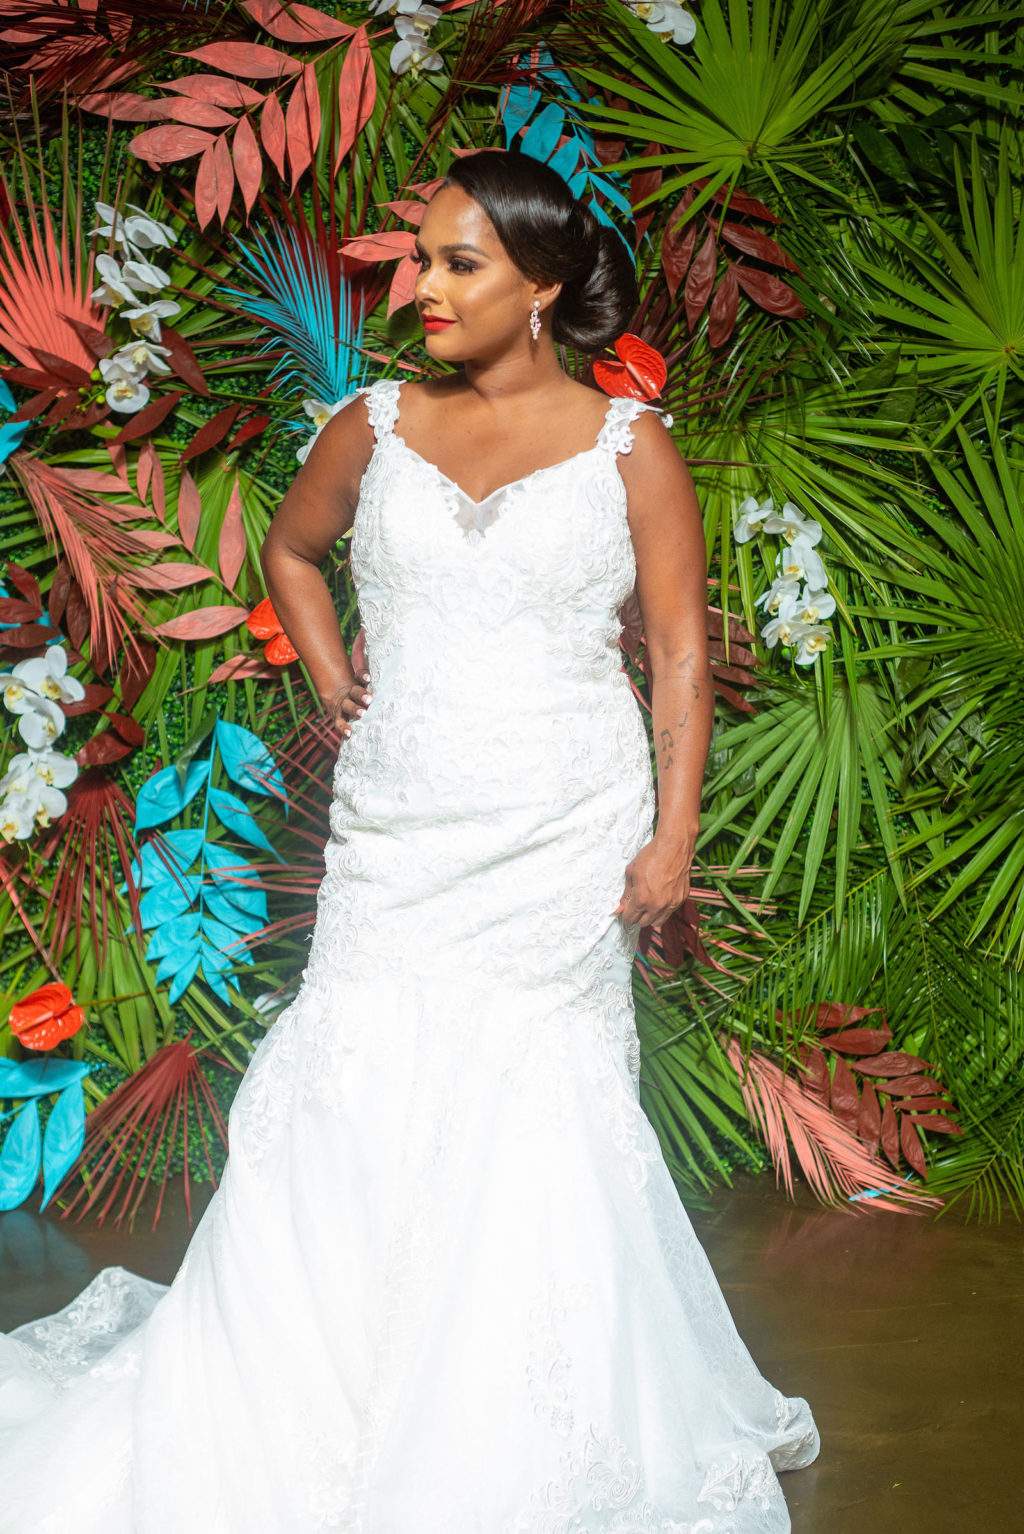 Dearly Beloved Fashion Show, Bride Wearing Fitted Mermaid Wedding Dress wtih Lace Straps, Fit and Flare Gown by Royal Bridal, Modern Tropical Floral Wall with Green, Pink and Aqua Blue | Florida Wedding Venue 7th and Grove